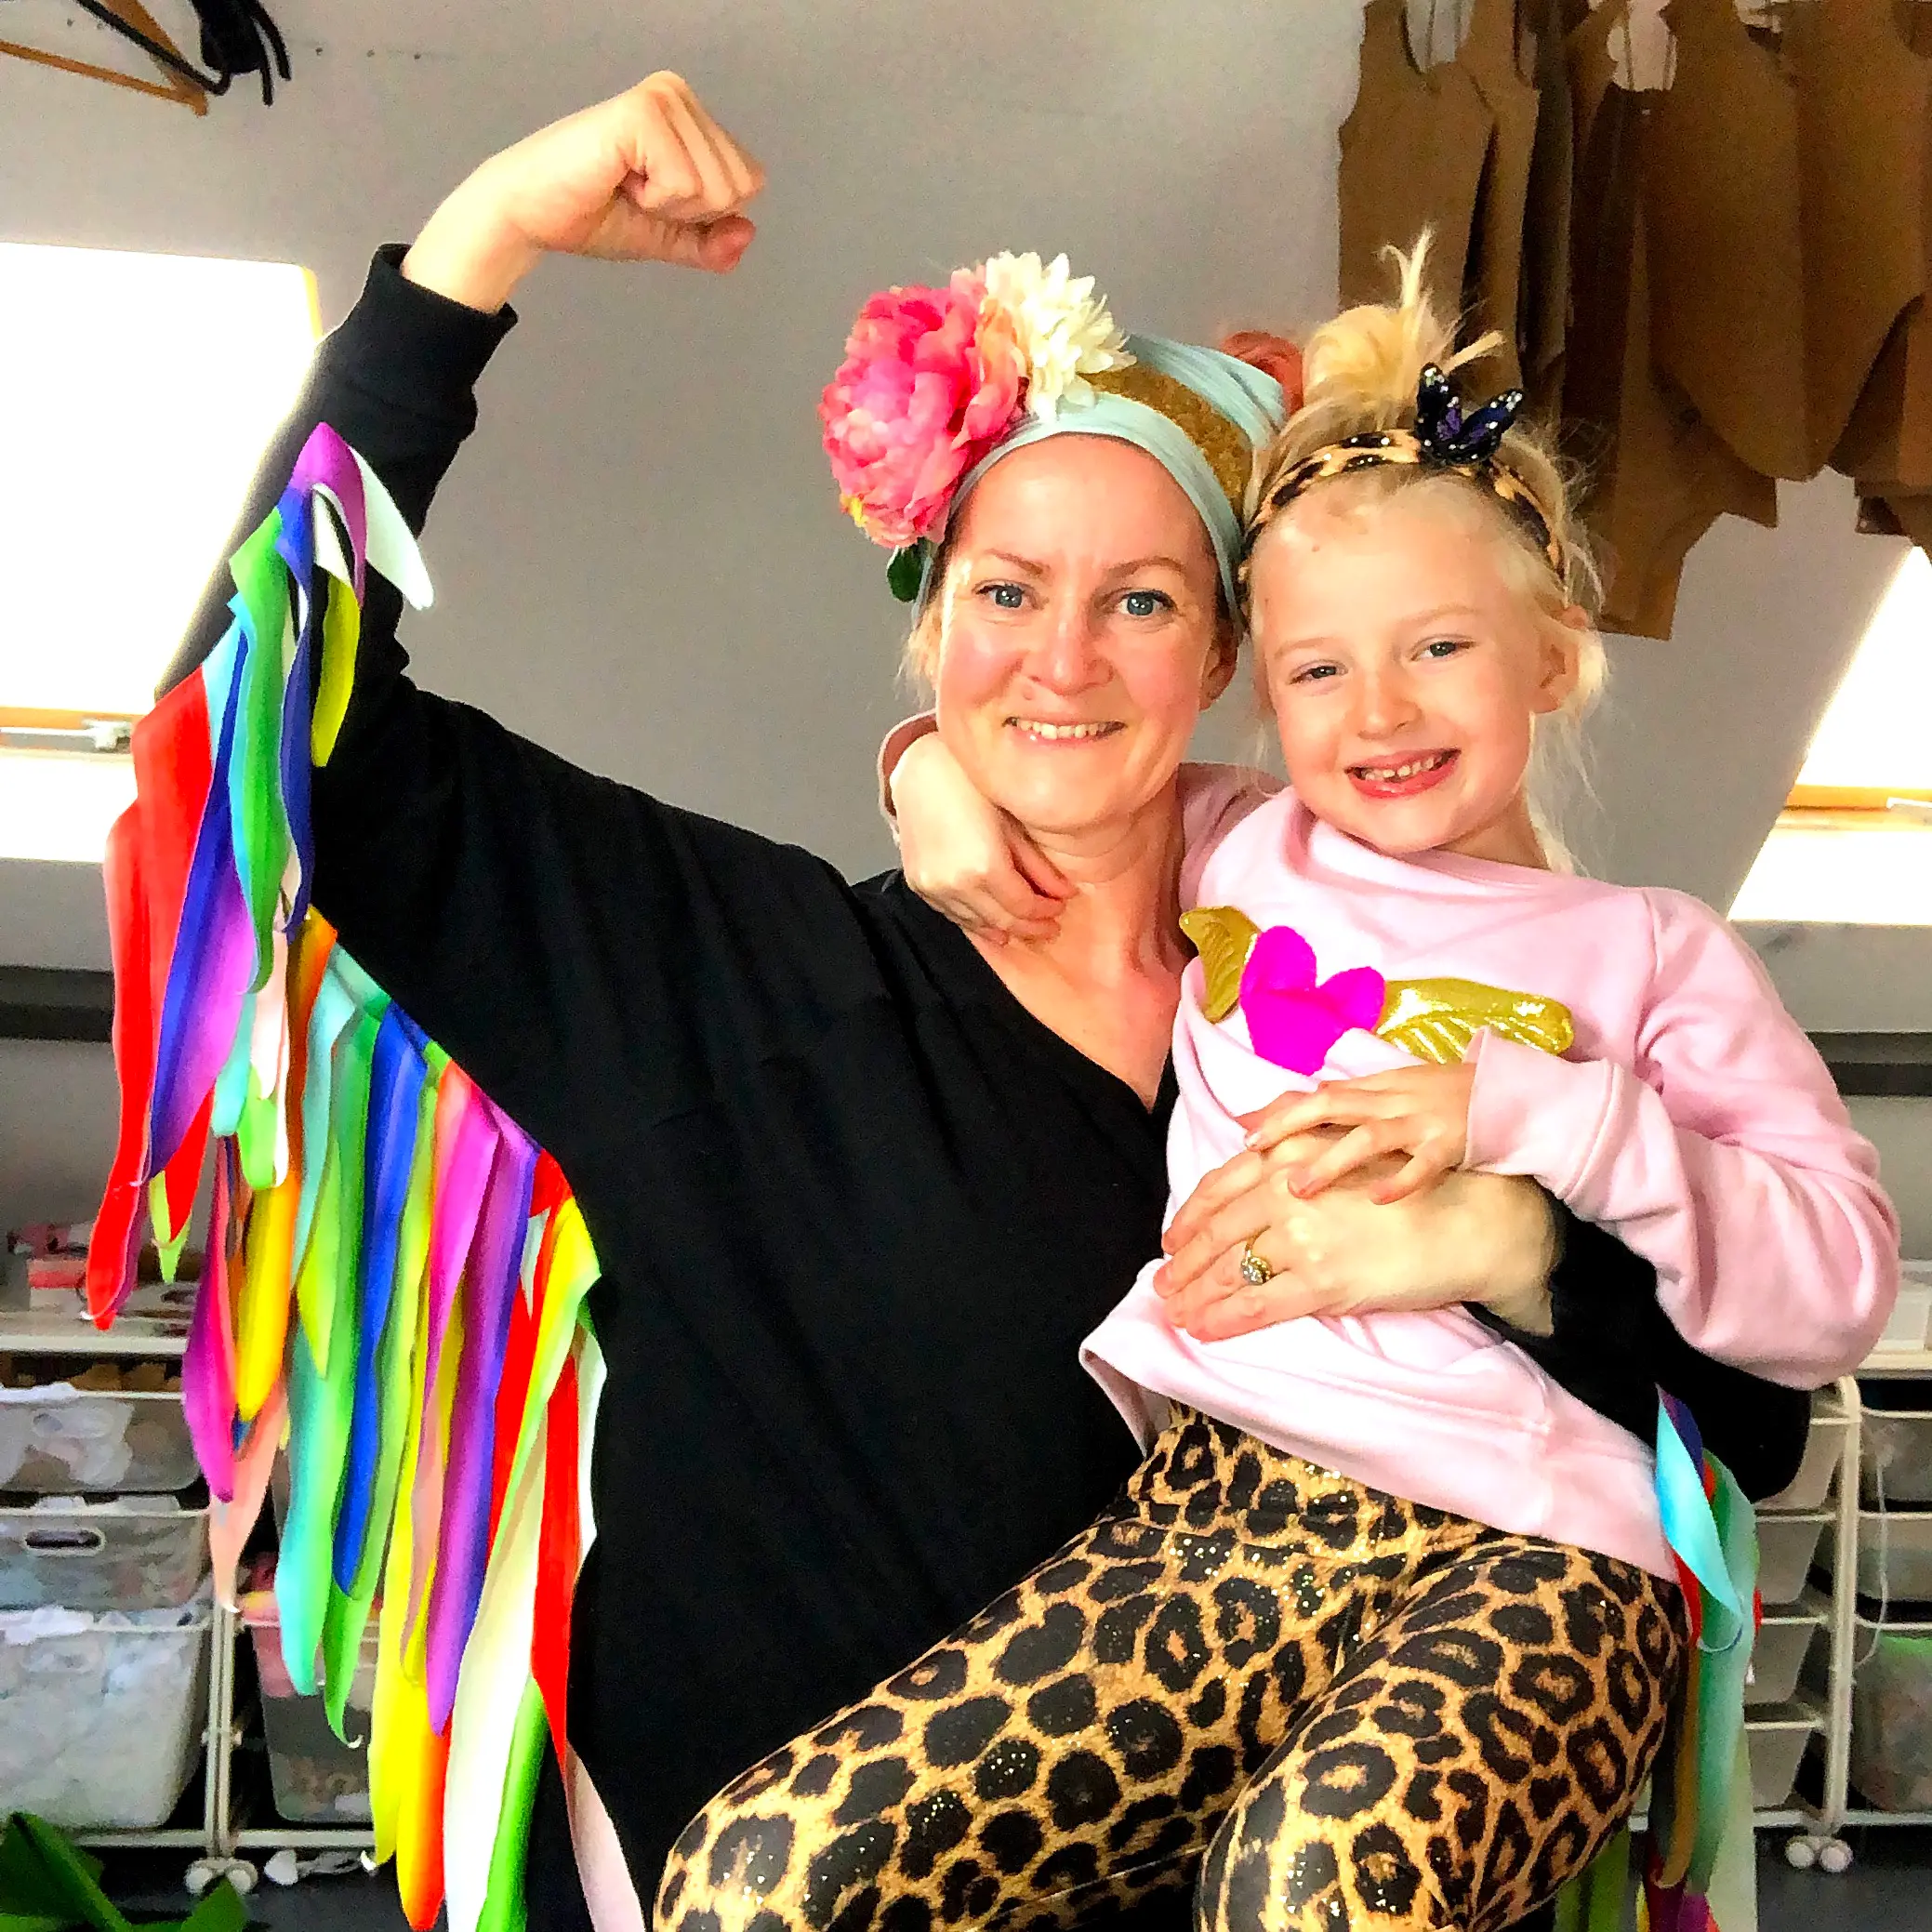 Founder of childrens brand 'Flingo and Swollop' standing in her studio with her daughter. both wearing Flingo and swollop clothes. A black sweatshirt with rainbow wings. Her daughter is wearing a pair of sparkly leopard print leggings. they are both smiling.